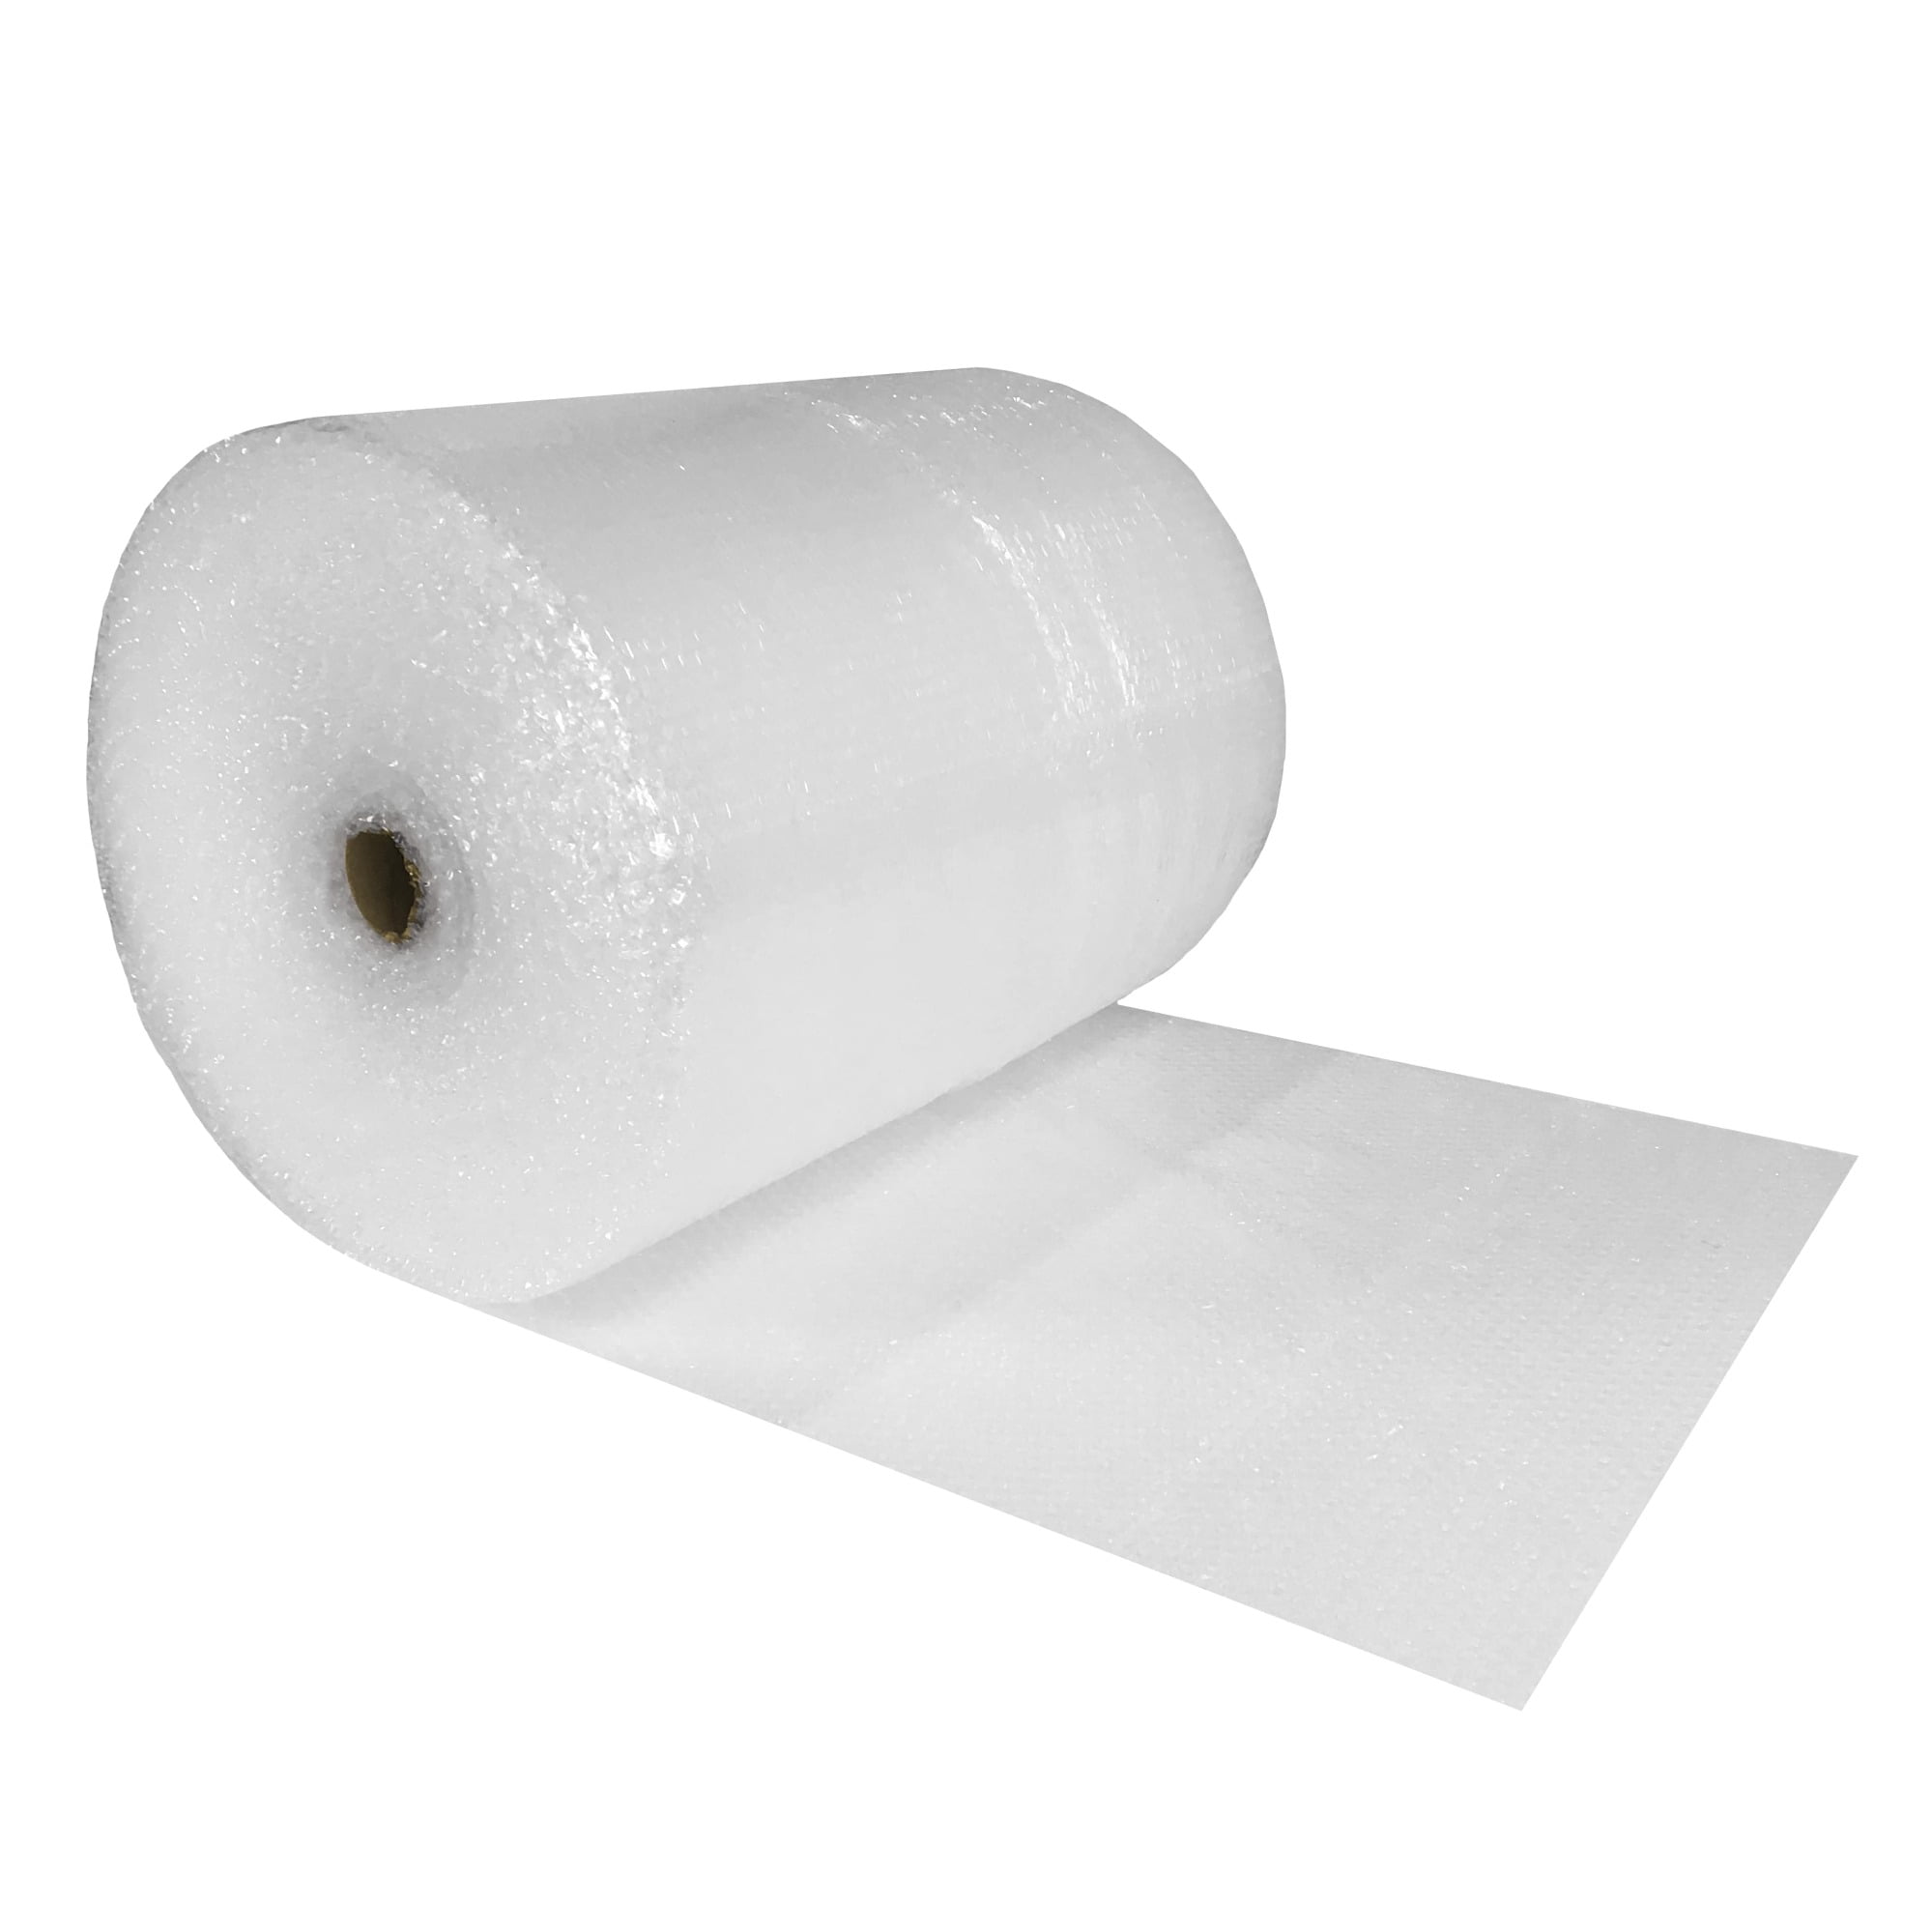 FREE 24 h DELIVERY 1 ROLL JIFFY BUBBLE WRAP LARGE BUBBLES 300 MM x 50 M 